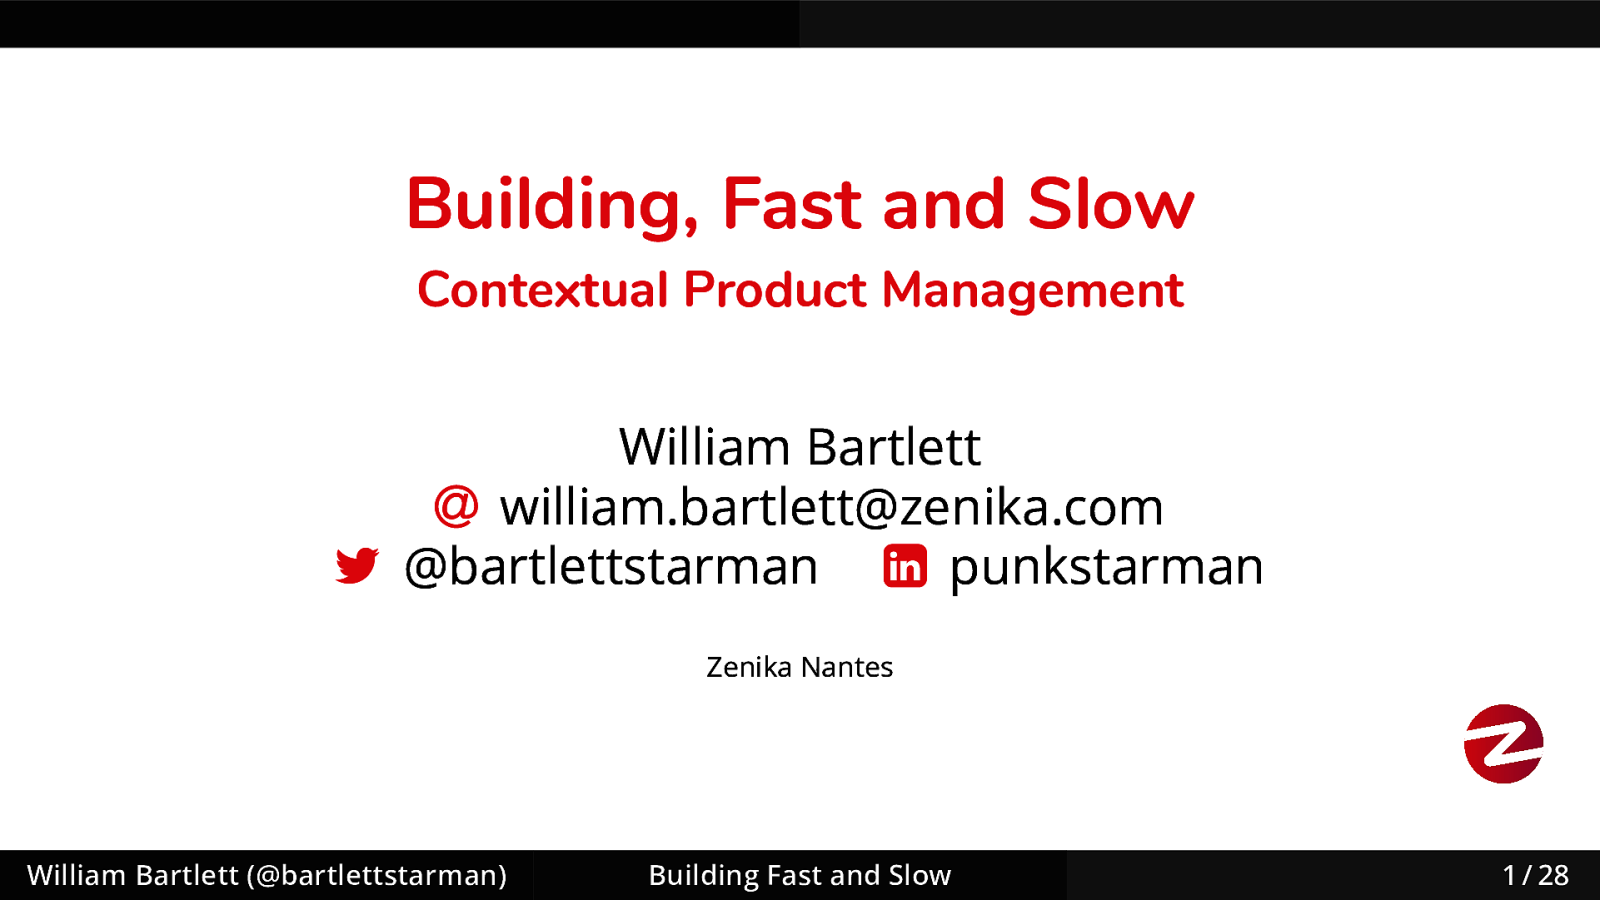 Building, Fast and Slow: Contextual Product Management by William Bartlett